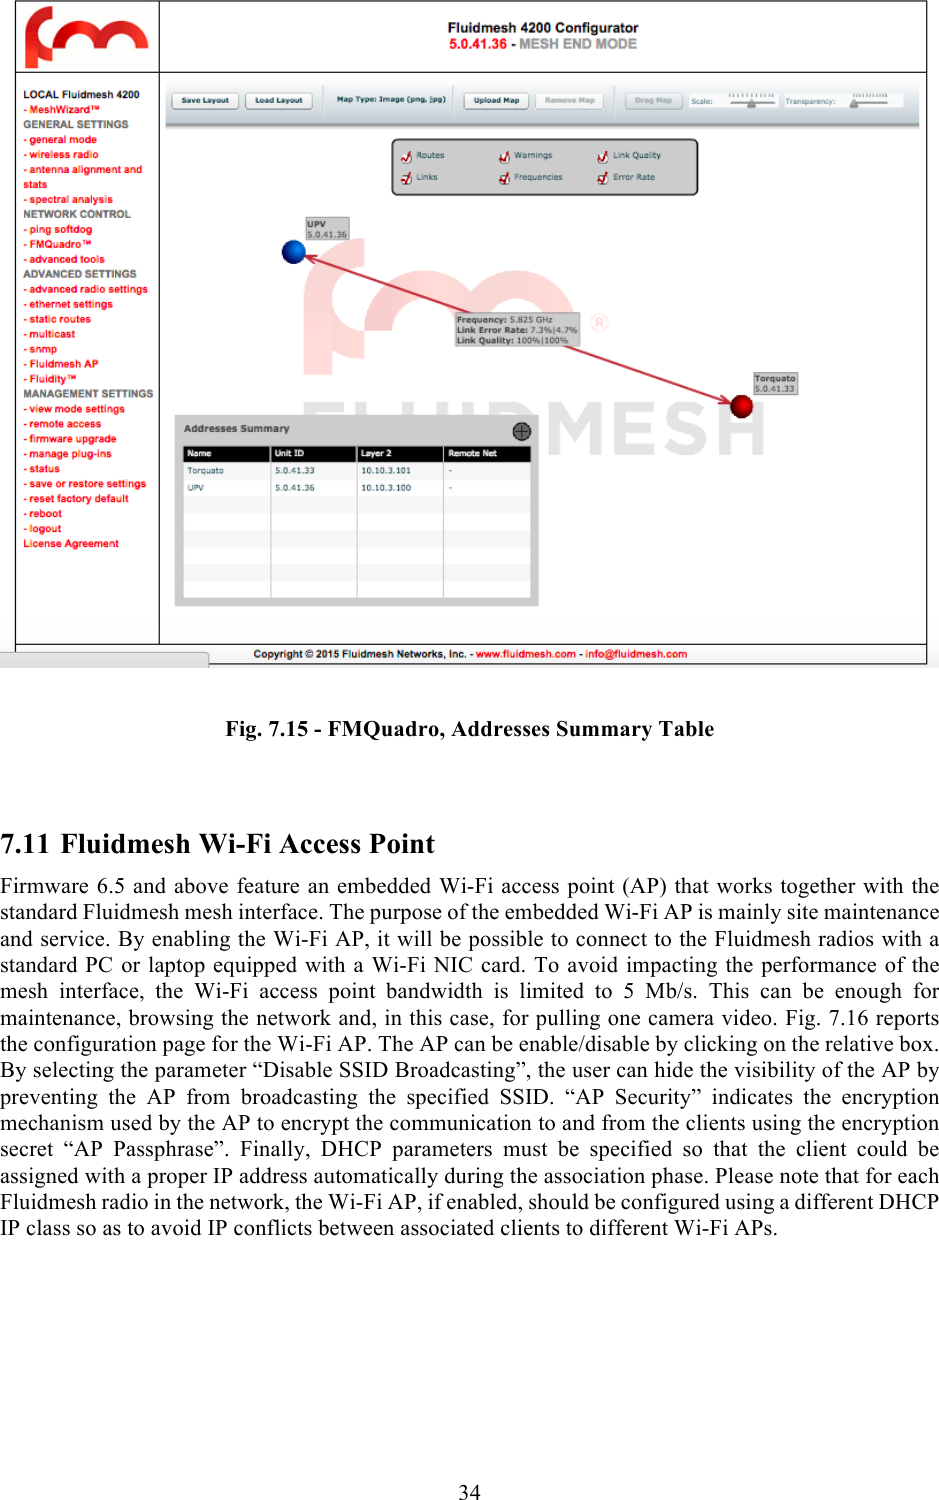  34    Fig. 7.15 - FMQuadro, Addresses Summary Table  7.11 Fluidmesh Wi-Fi Access Point Firmware 6.5 and above feature an embedded Wi-Fi access point (AP) that works together with the standard Fluidmesh mesh interface. The purpose of the embedded Wi-Fi AP is mainly site maintenance and service. By enabling the Wi-Fi AP, it will be possible to connect to the Fluidmesh radios with a standard PC or laptop equipped with a Wi-Fi NIC card. To avoid impacting the performance of the mesh  interface,  the  Wi-Fi  access  point  bandwidth  is  limited  to  5  Mb/s.  This  can  be  enough  for maintenance, browsing the network and, in this case, for pulling one camera video. Fig. 7.16 reports the configuration page for the Wi-Fi AP. The AP can be enable/disable by clicking on the relative box. By selecting the parameter “Disable SSID Broadcasting”, the user can hide the visibility of the AP by preventing  the  AP  from  broadcasting  the  specified  SSID.  “AP  Security”  indicates  the  encryption mechanism used by the AP to encrypt the communication to and from the clients using the encryption secret  “AP  Passphrase”.  Finally,  DHCP  parameters  must  be  specified  so  that  the  client  could  be assigned with a proper IP address automatically during the association phase. Please note that for each Fluidmesh radio in the network, the Wi-Fi AP, if enabled, should be configured using a different DHCP IP class so as to avoid IP conflicts between associated clients to different Wi-Fi APs.   